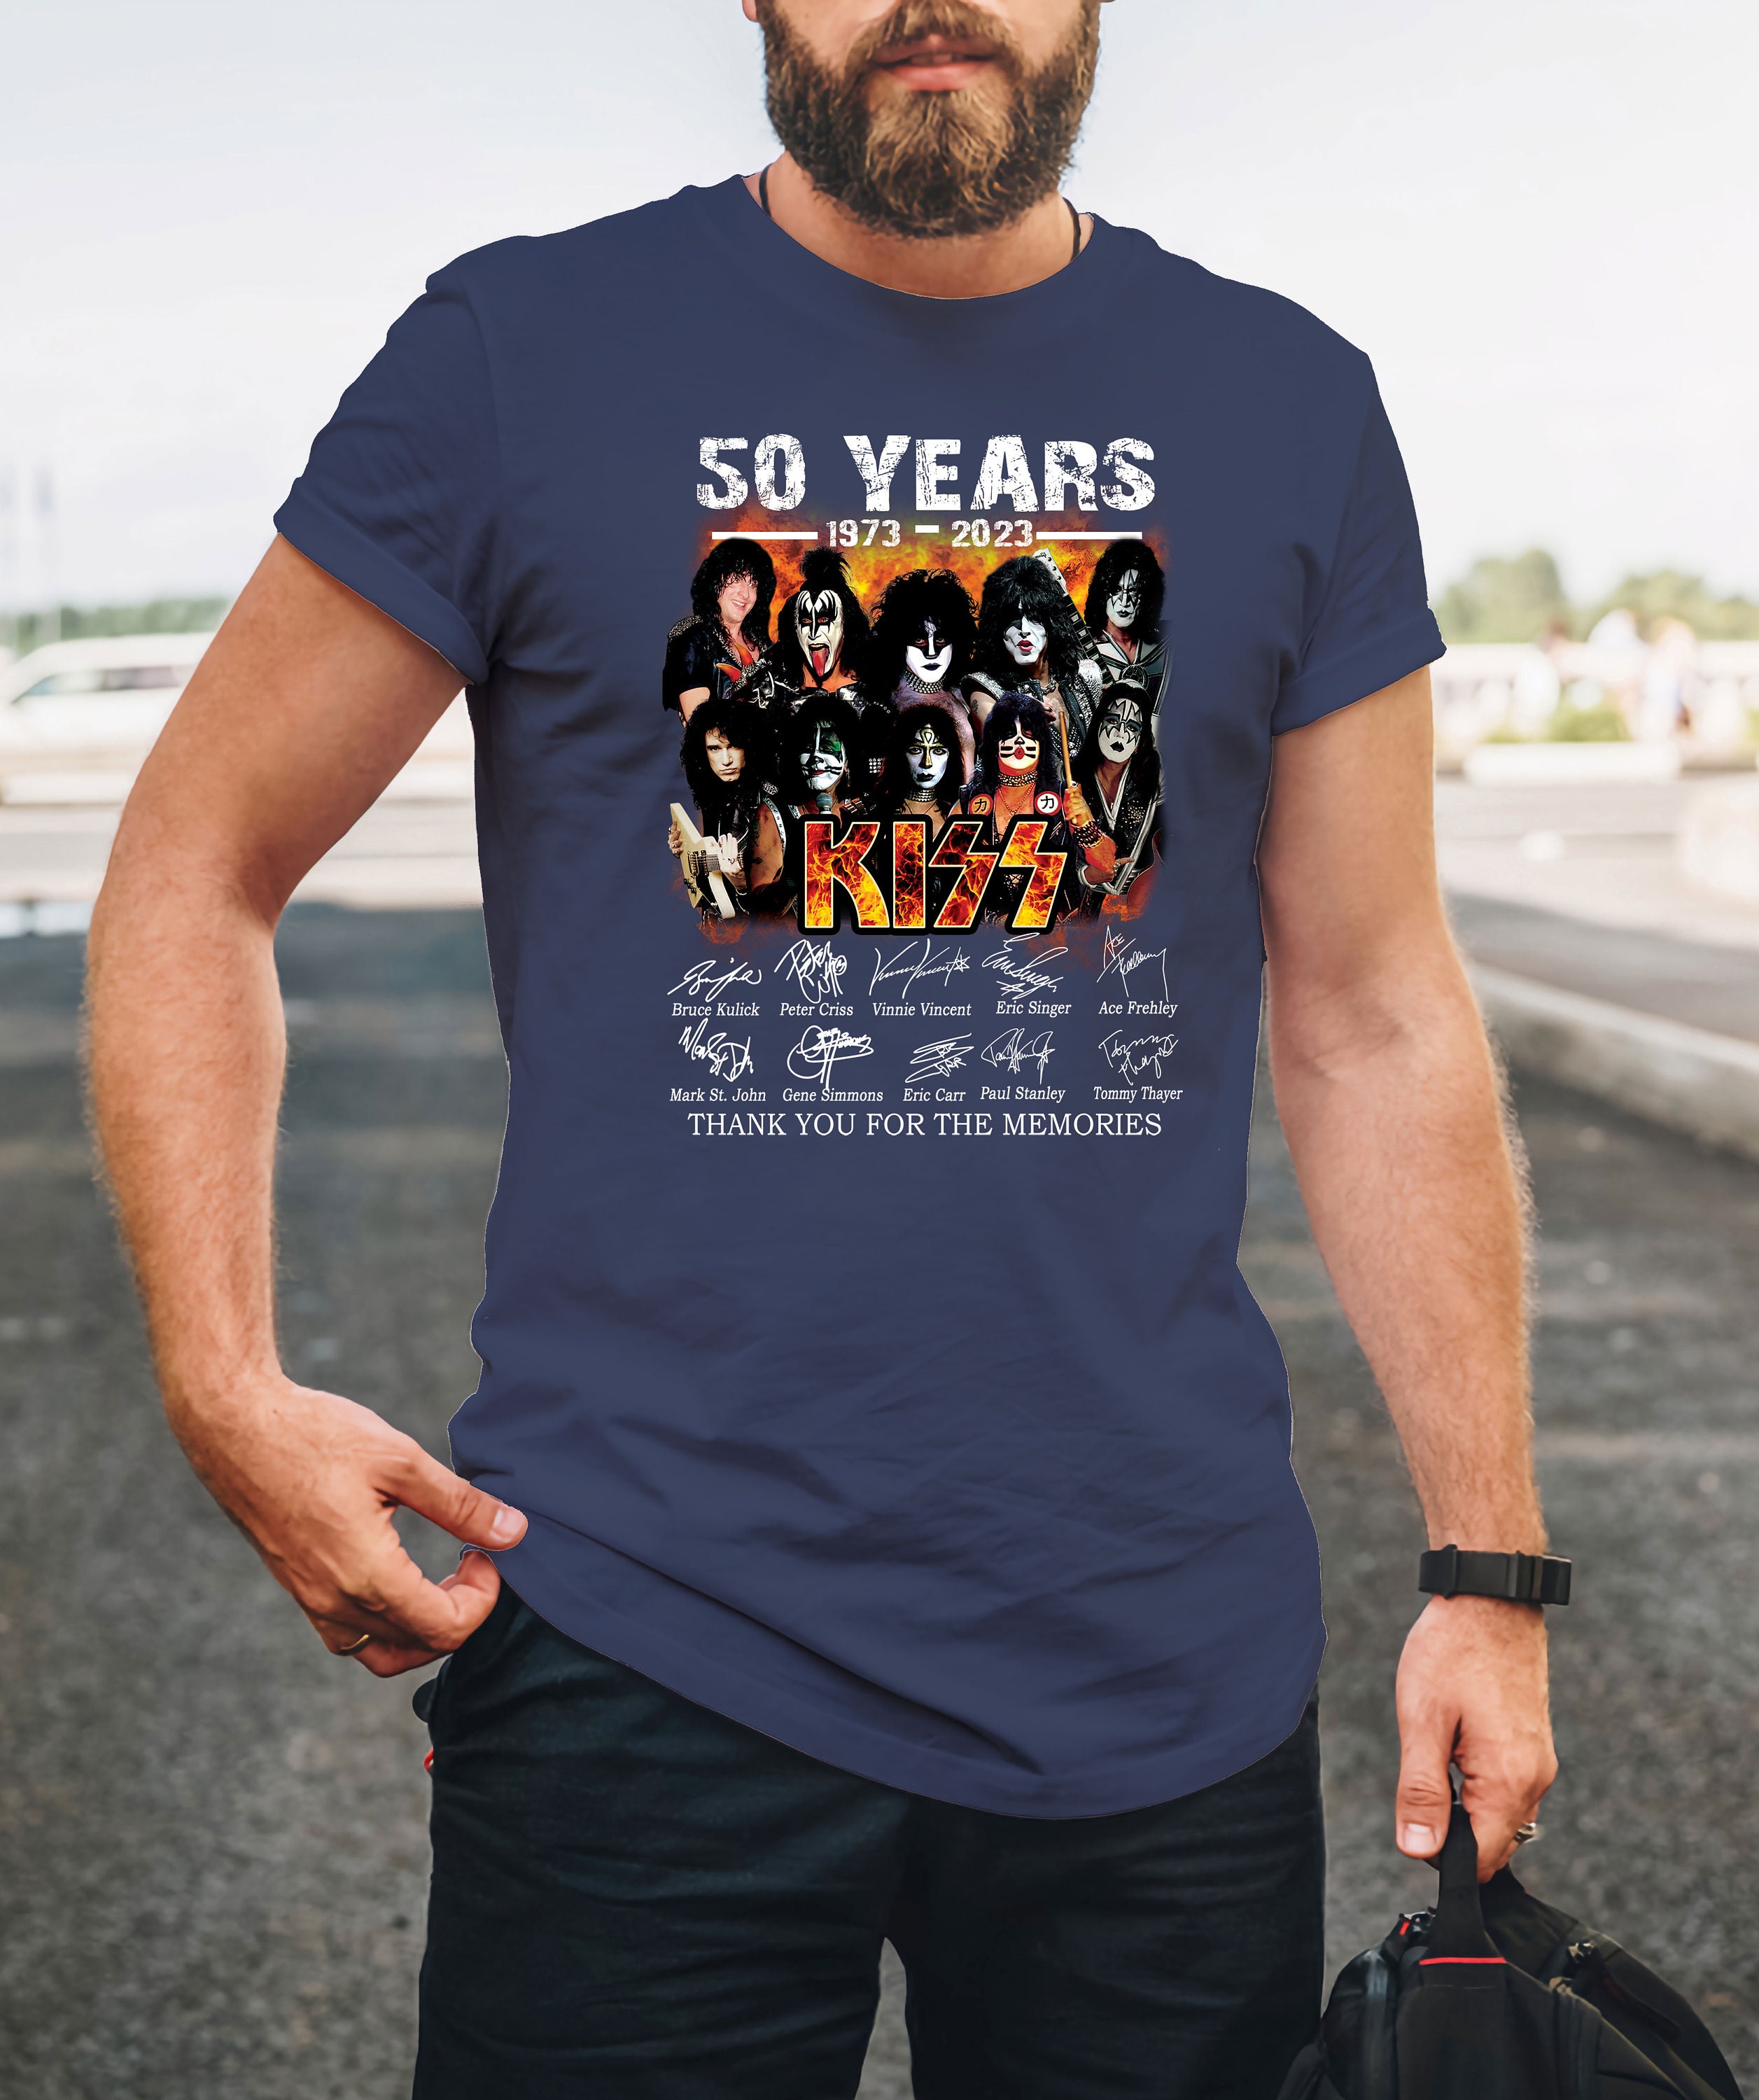 KISS End of the road tour 2023-All Disign Unisex T-Shirt - Full Color ,  S-3XL